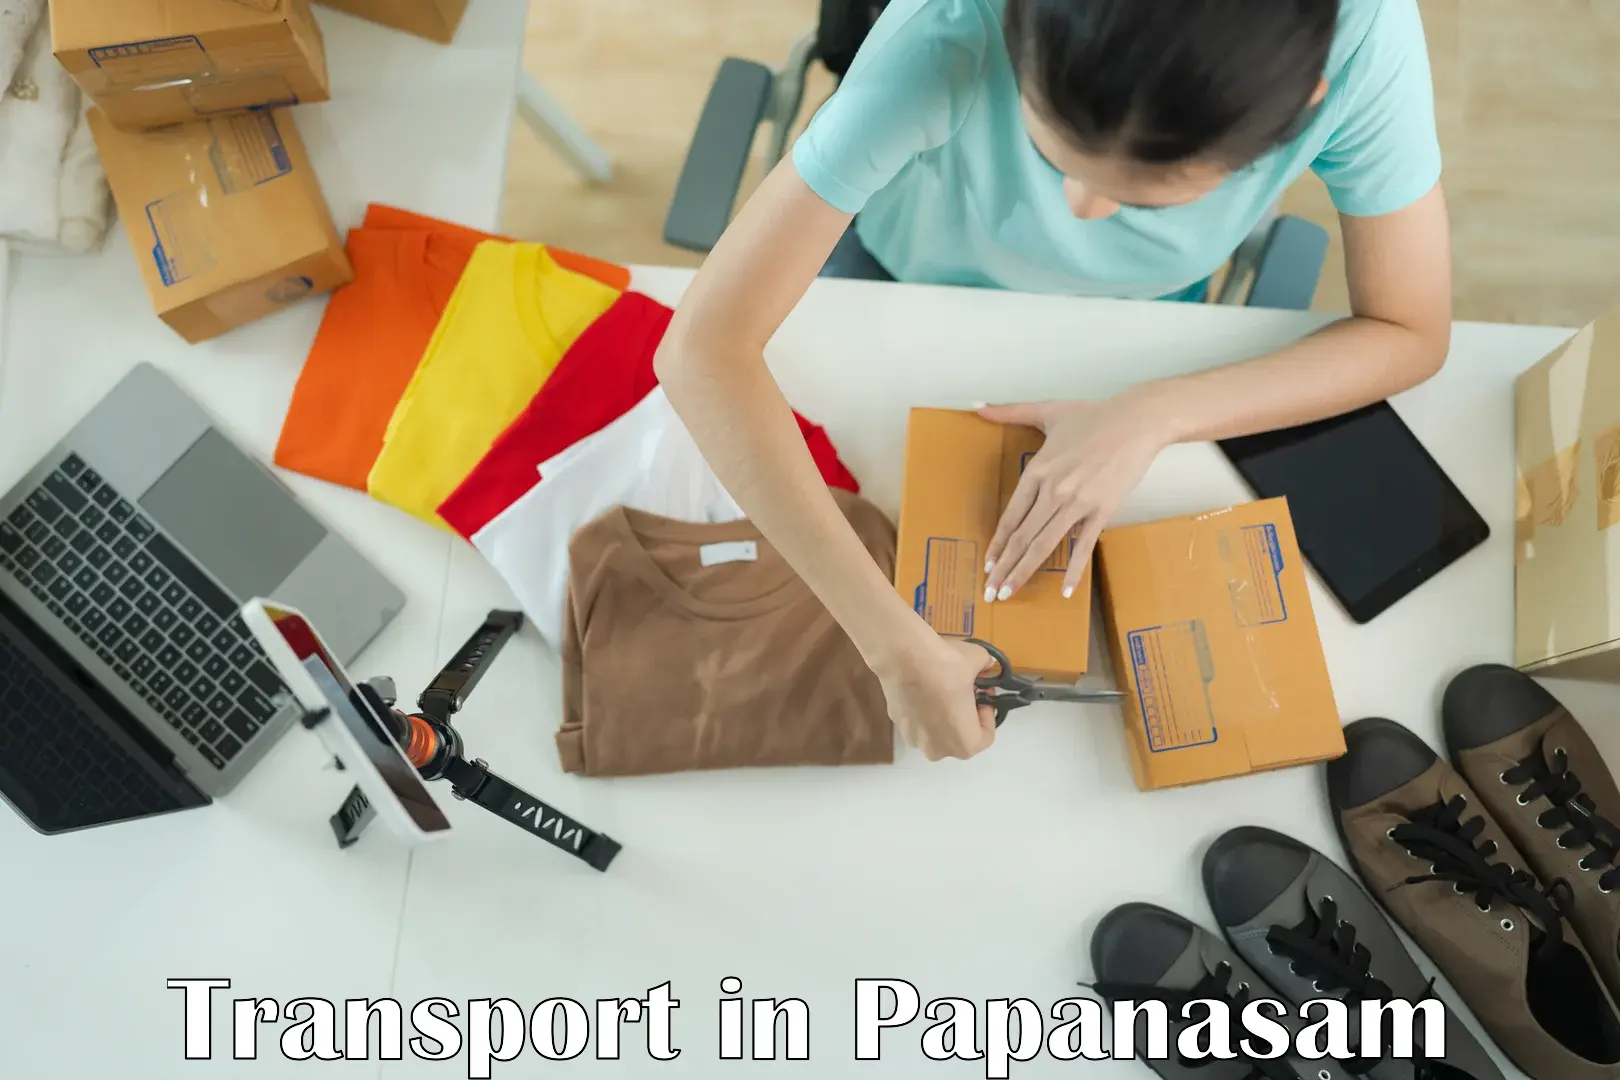 Luggage transport services in Papanasam